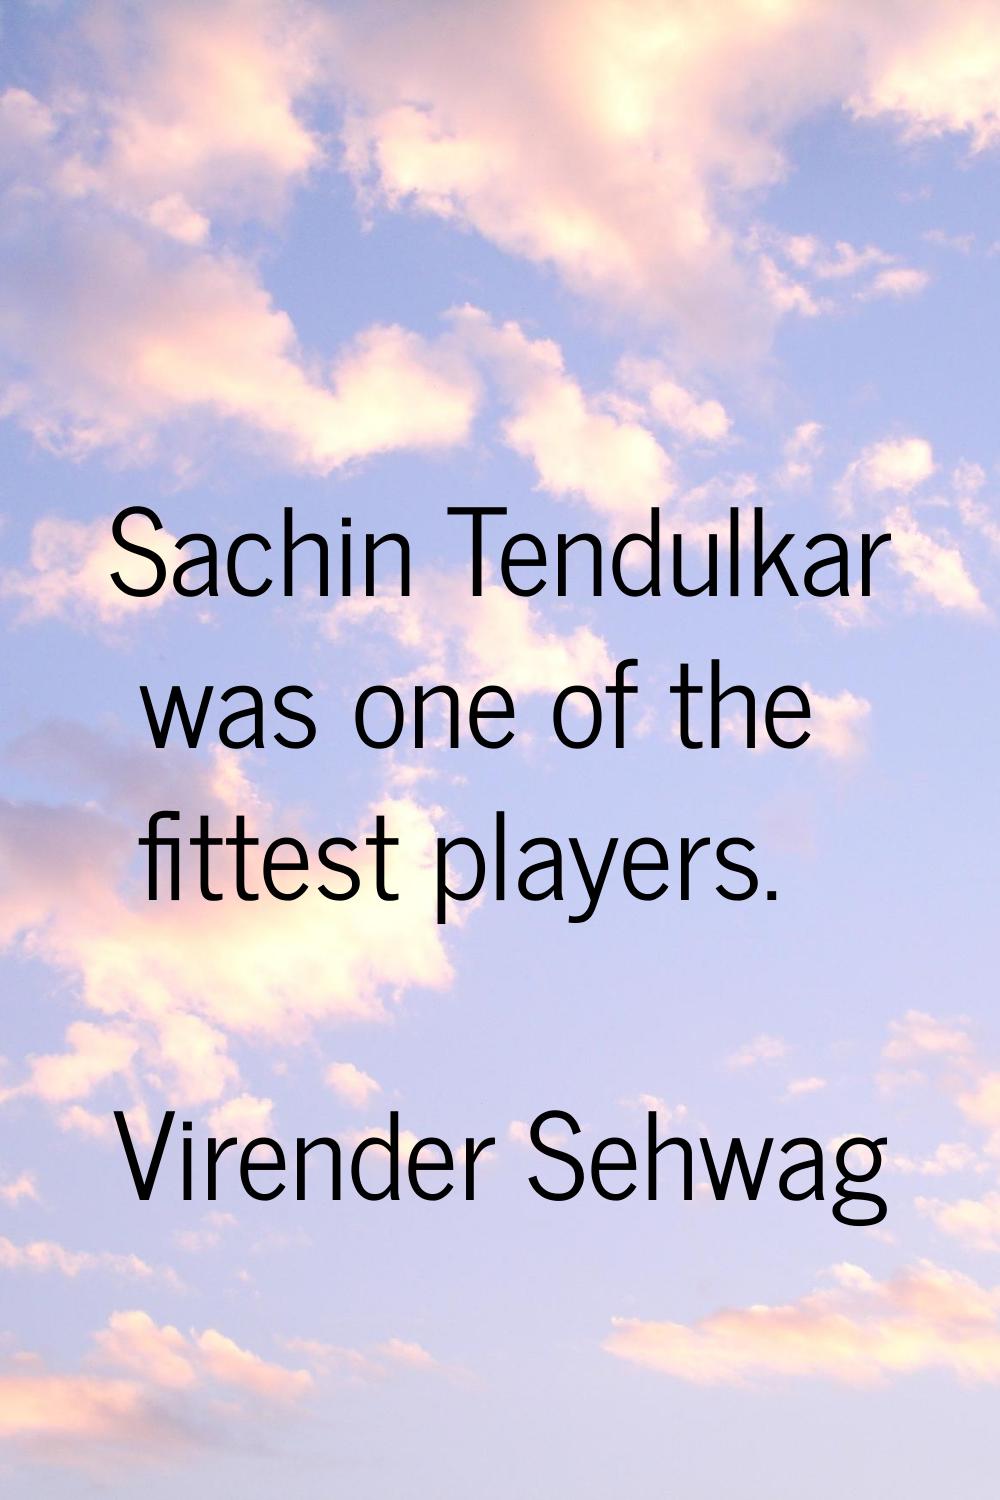 Sachin Tendulkar was one of the fittest players.